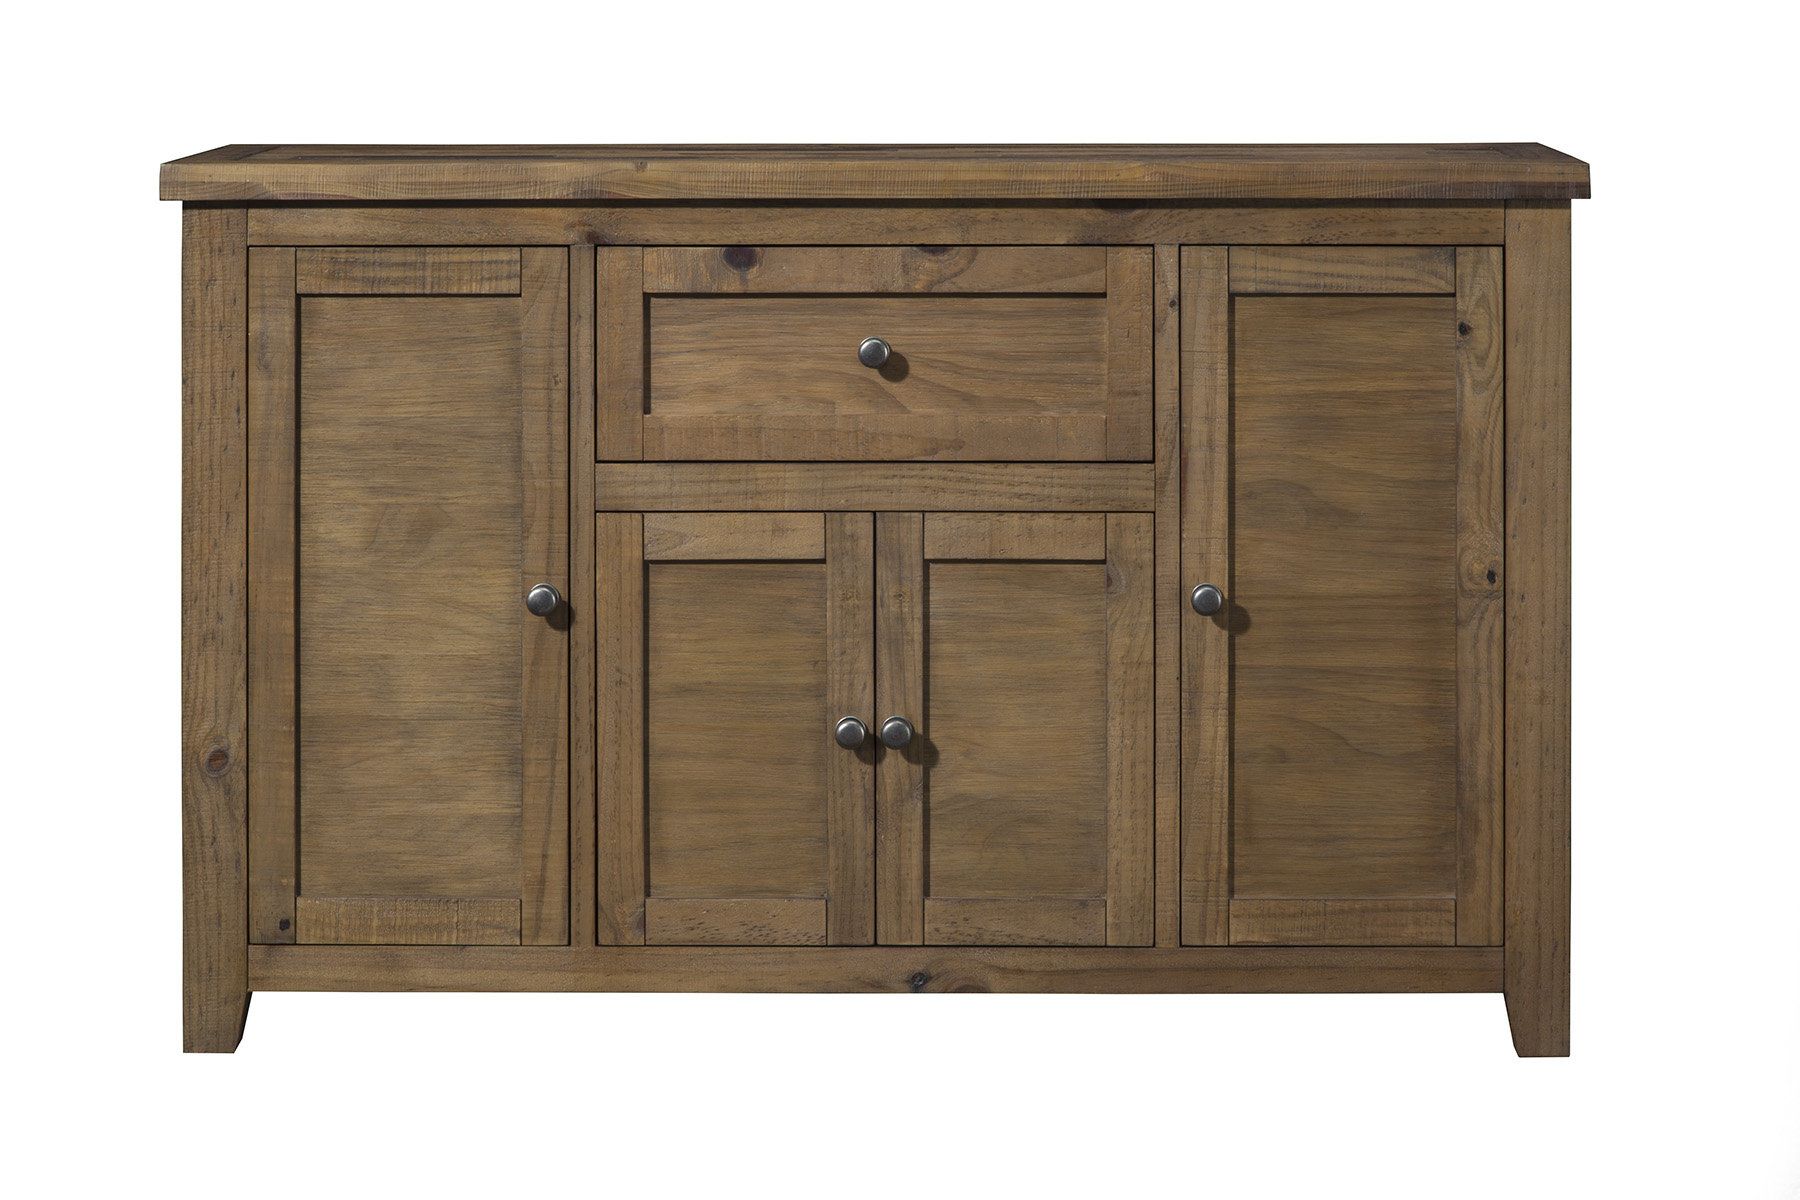 Details About Gracie Oaks Whitten Sideboard Intended For Whitten Sideboards (Gallery 1 of 20)